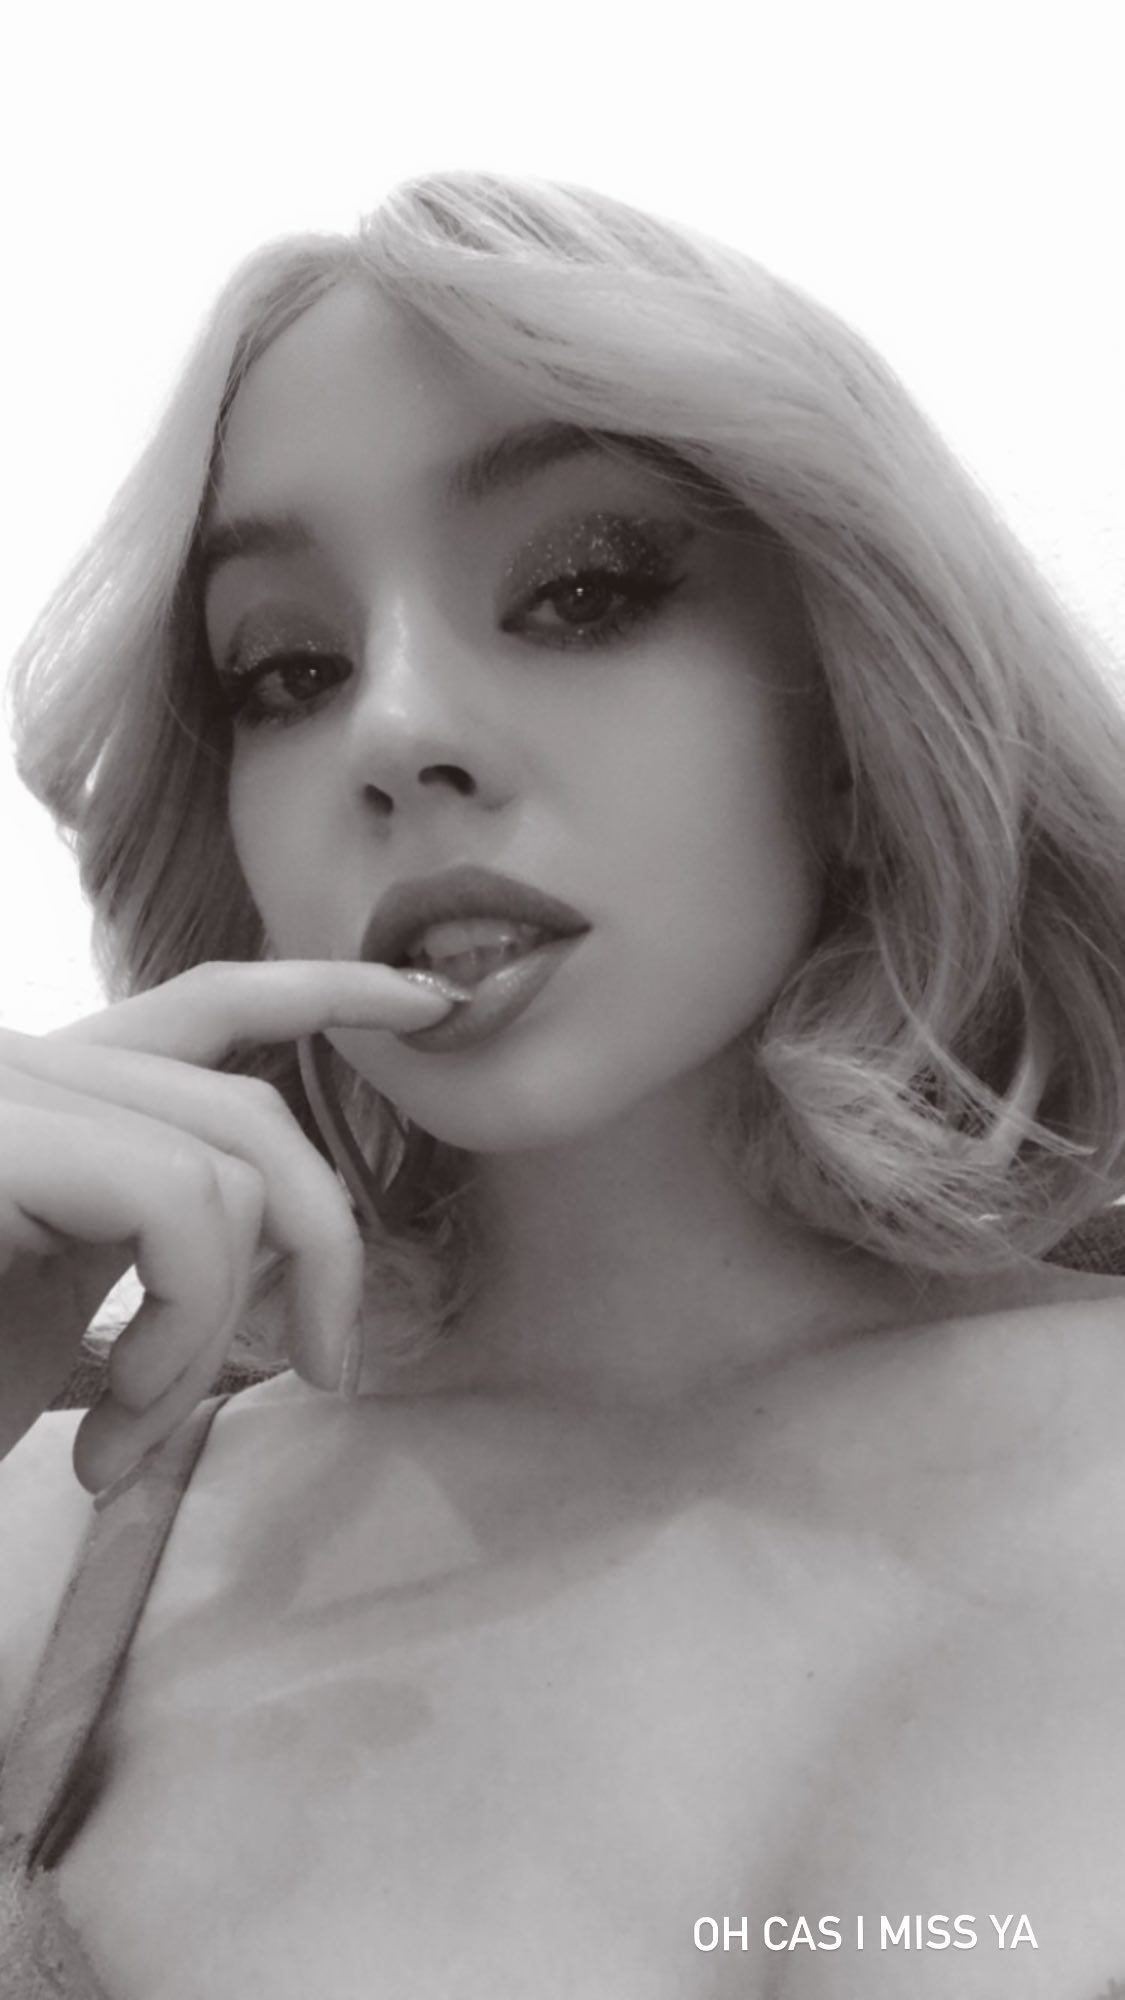 Photos n°2 : Sydney Sweeney is Wigging Out!